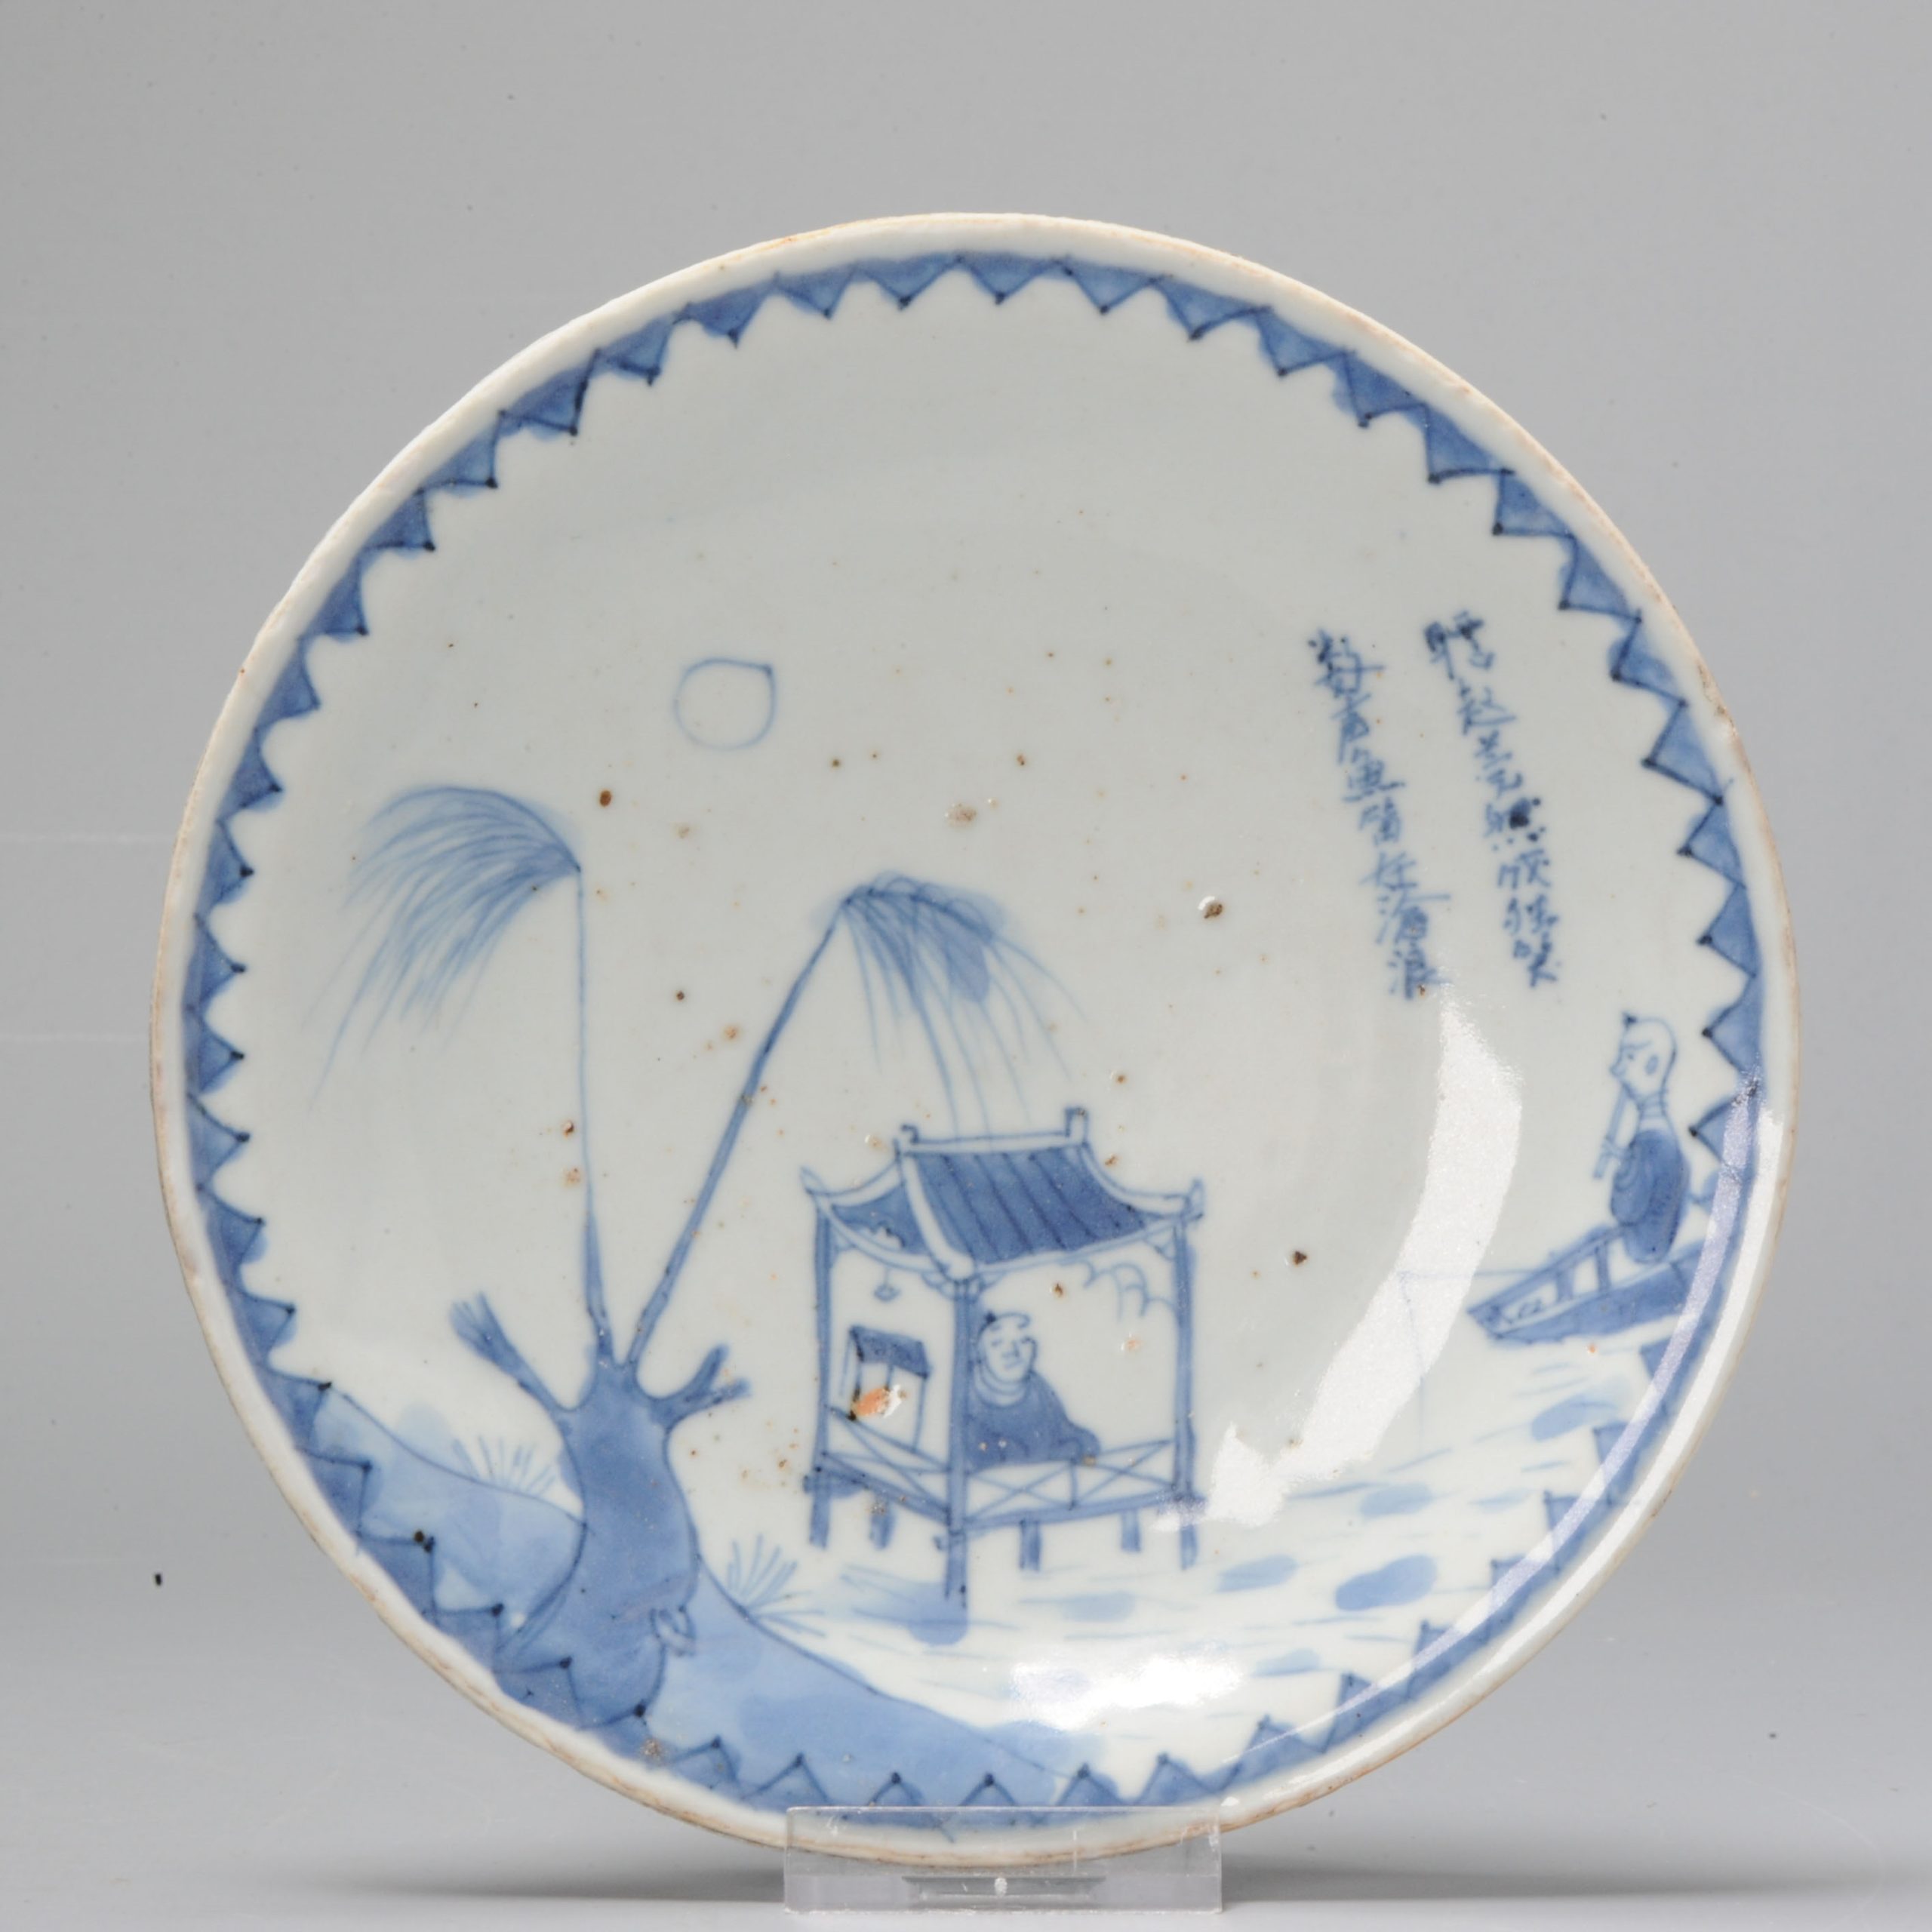 Rare Ca 1600-1660 Chinese Porcelain Ming Period Kosometsuke Plates Boat and Fisher